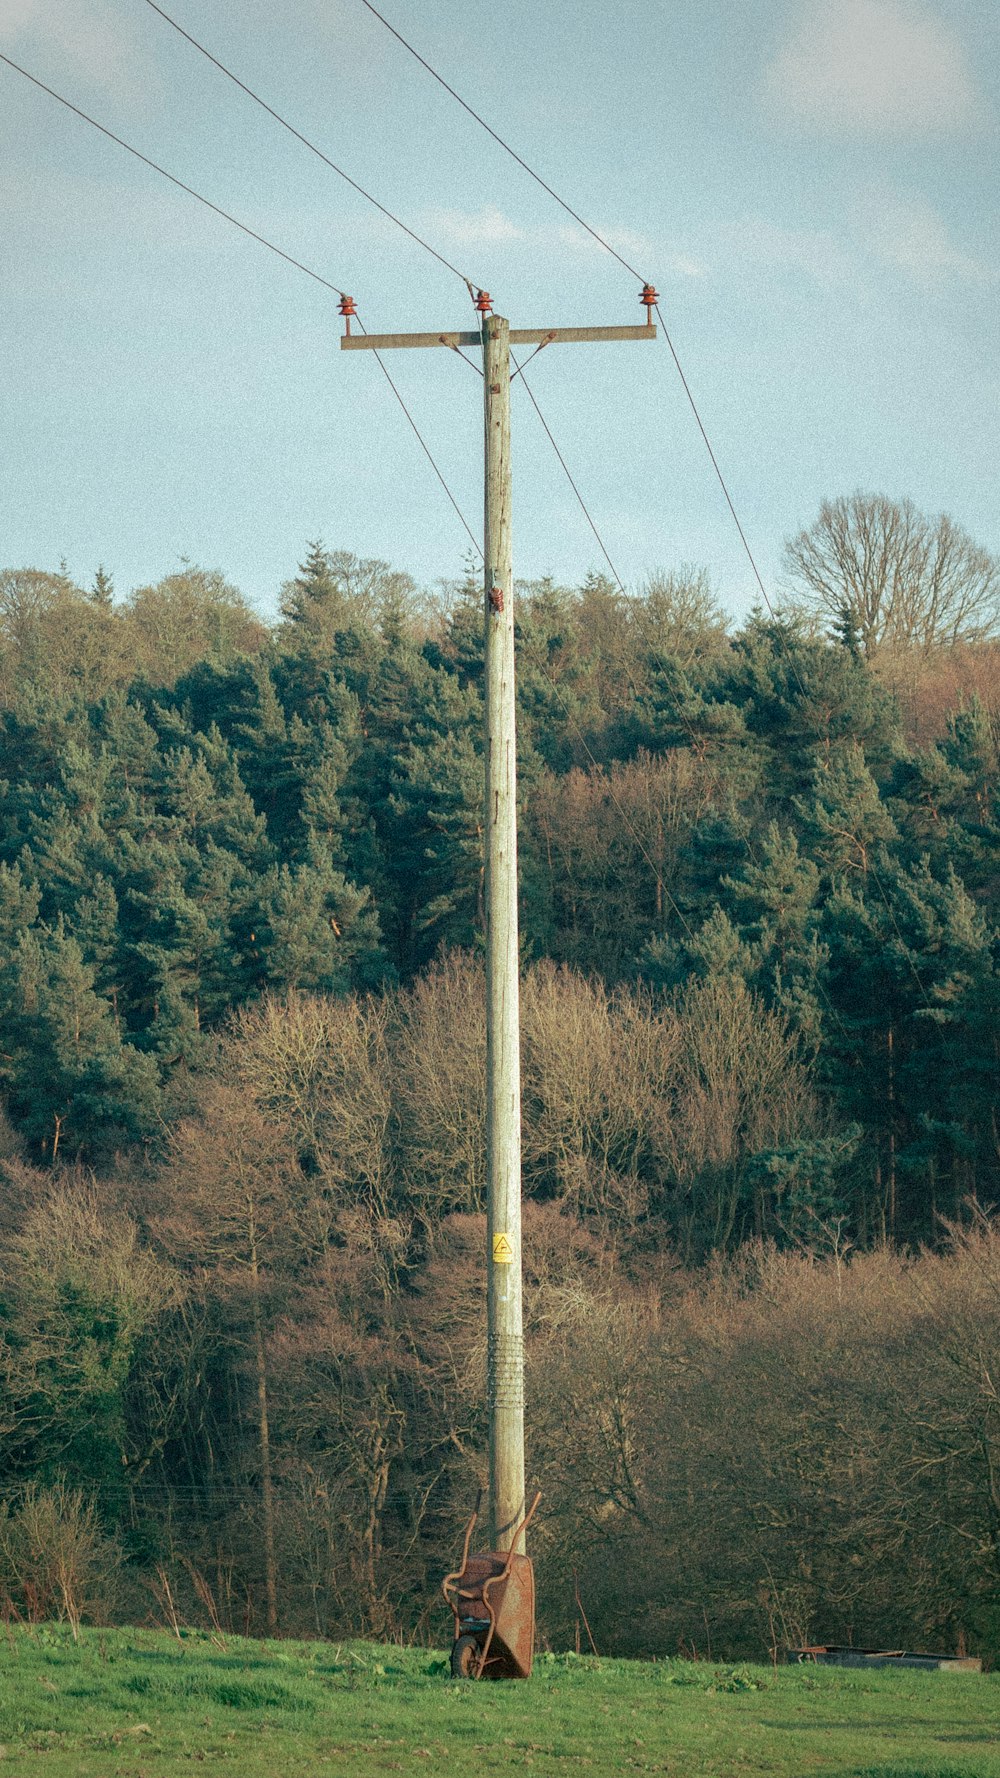 a telephone pole in a field with trees in the background